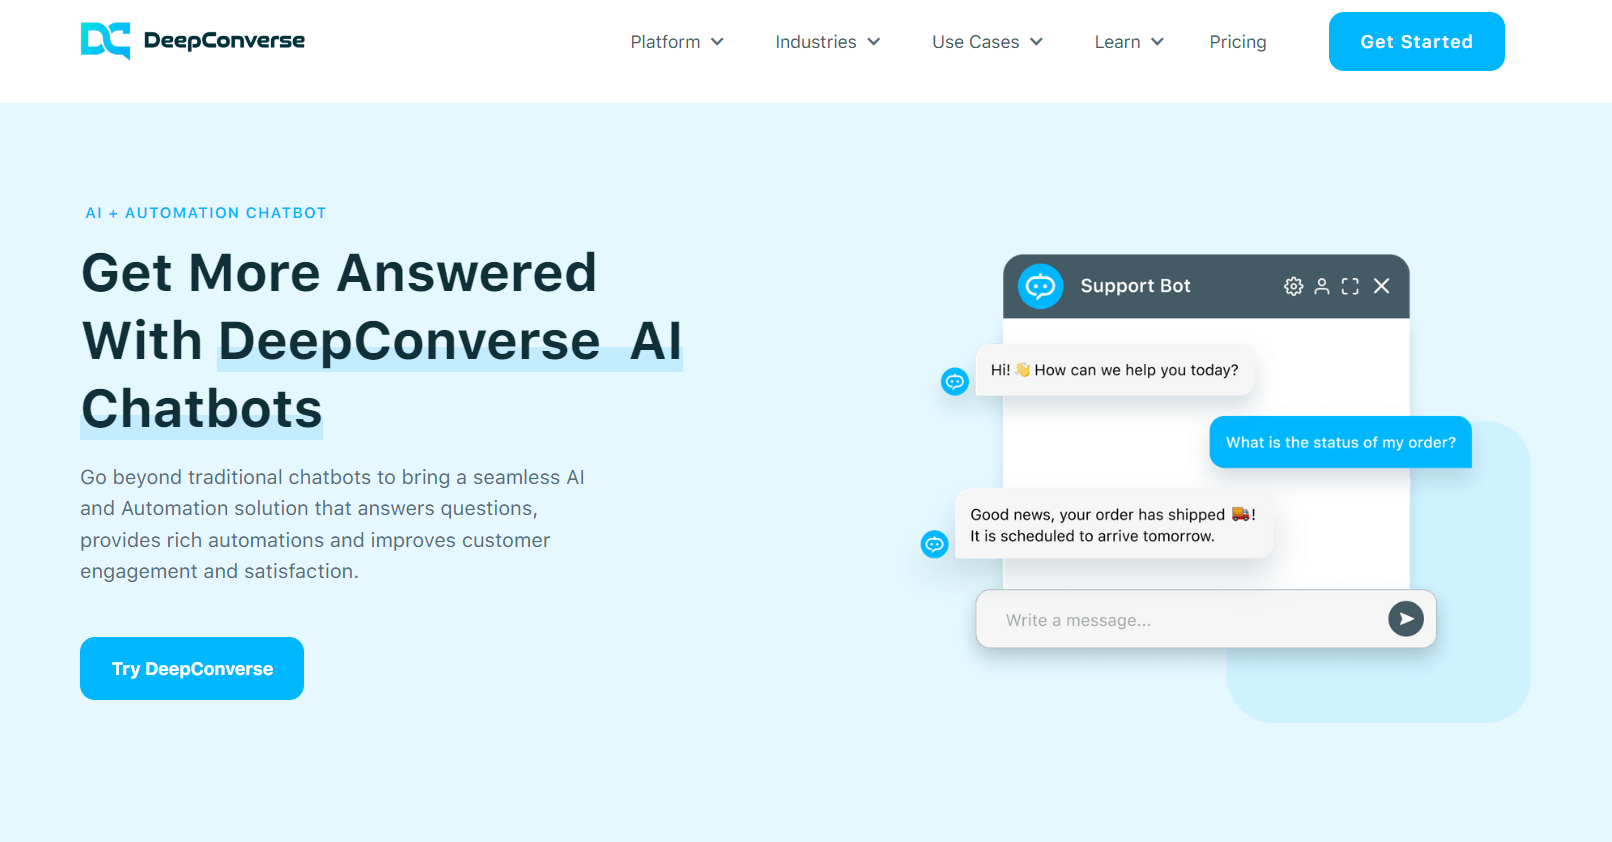 DeepConverse - get more answered with AI chatbots and automation